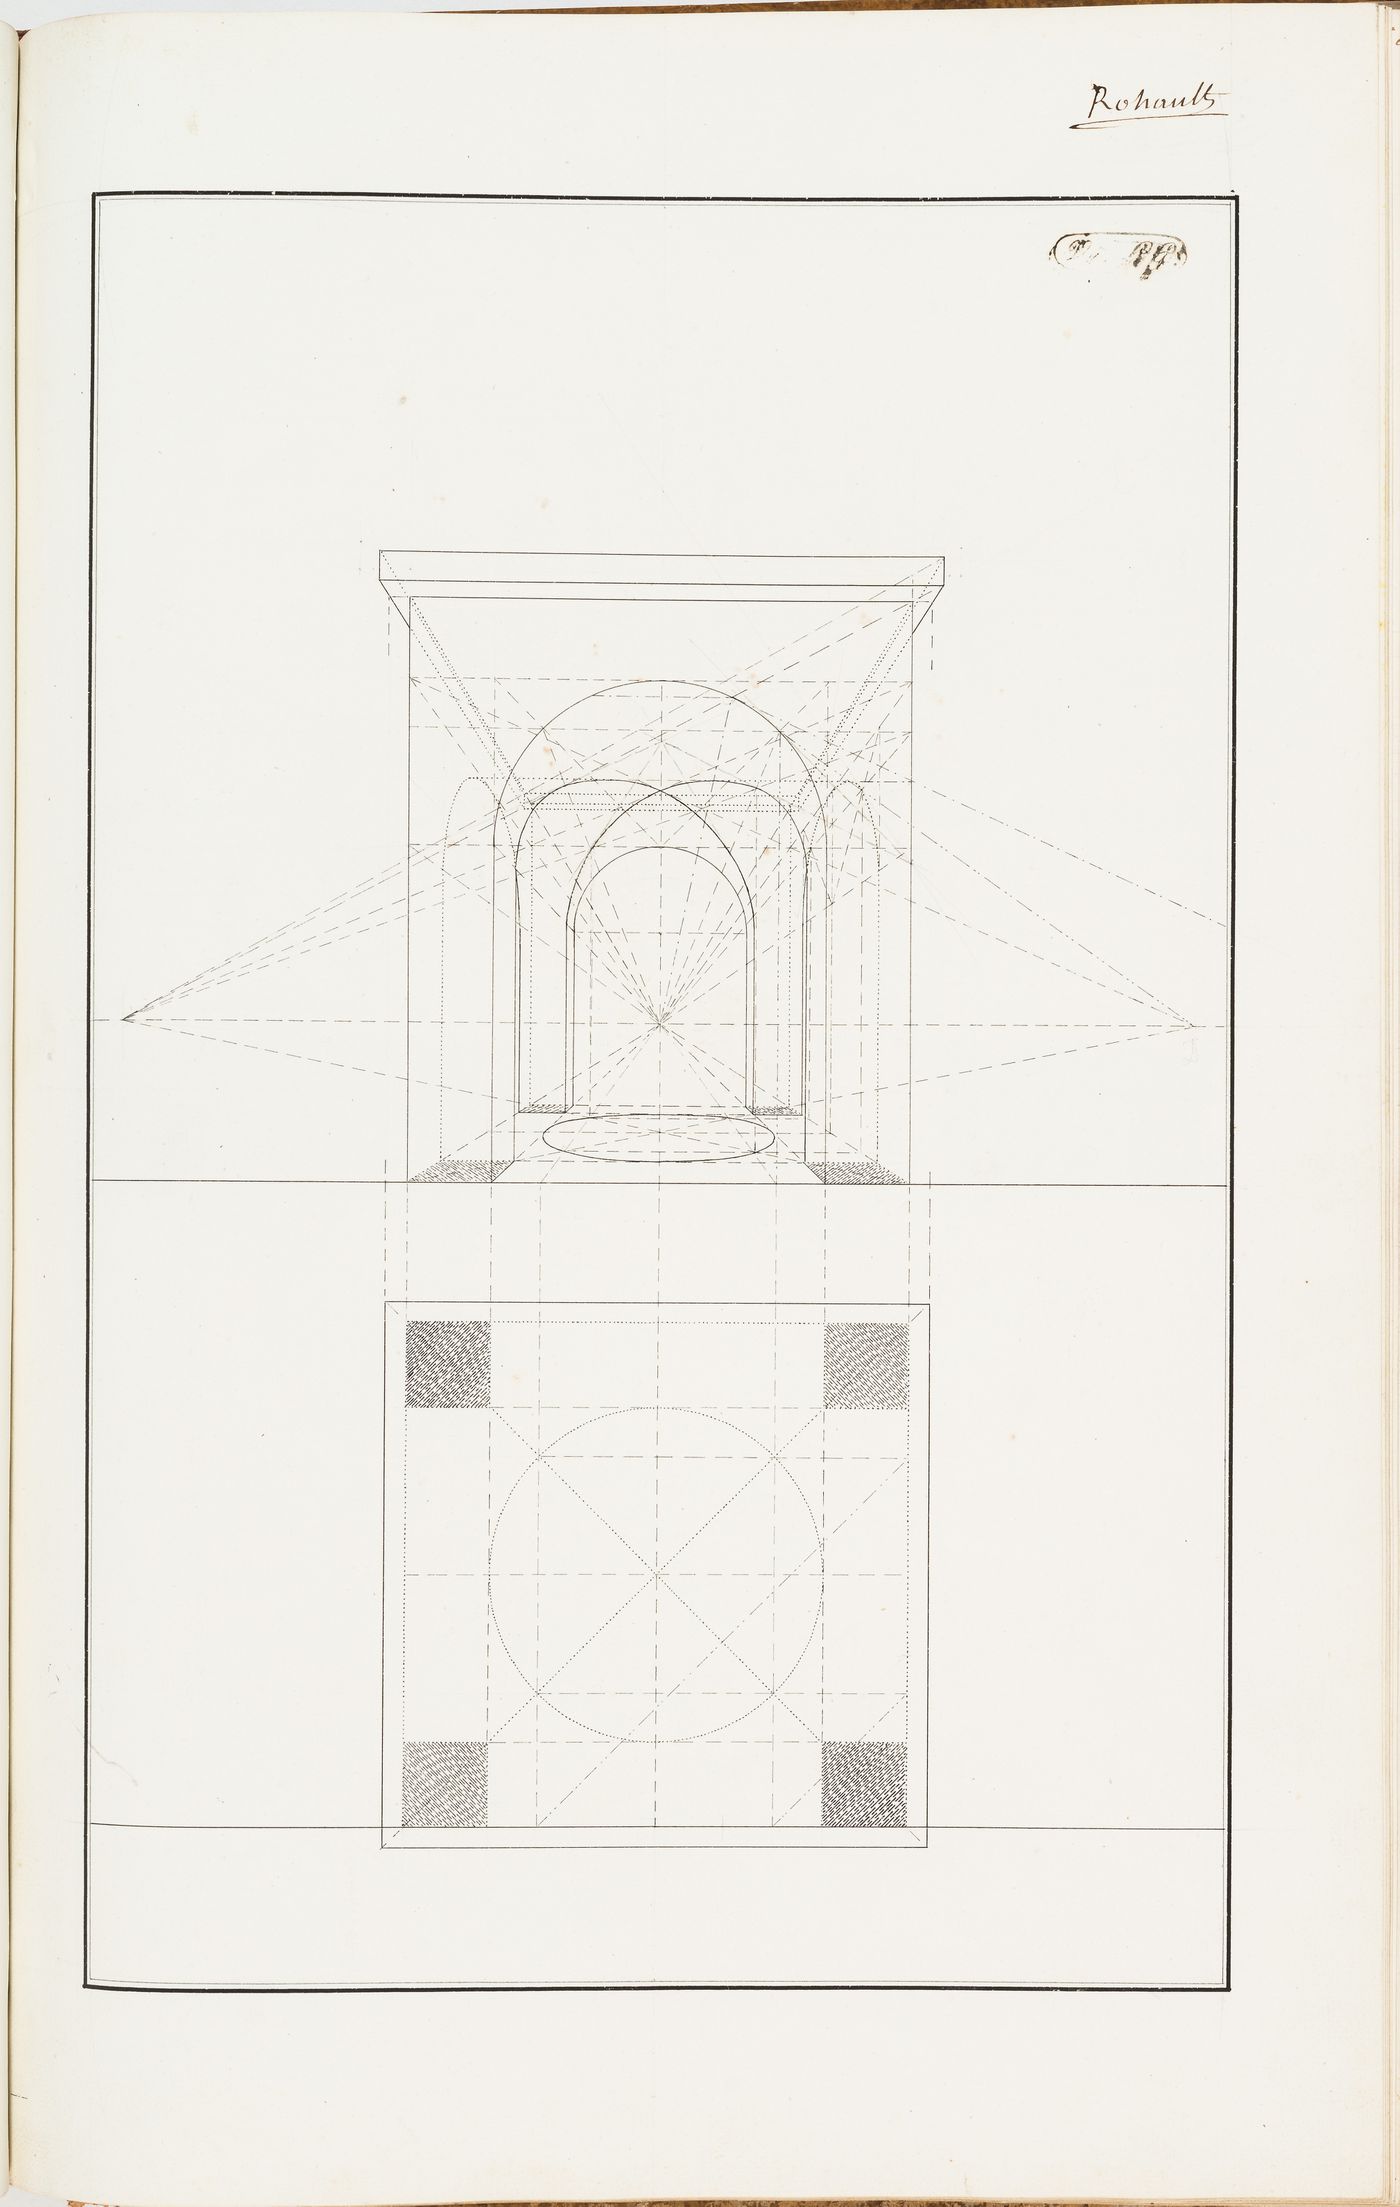 Perspective exercise for a small square pavilion